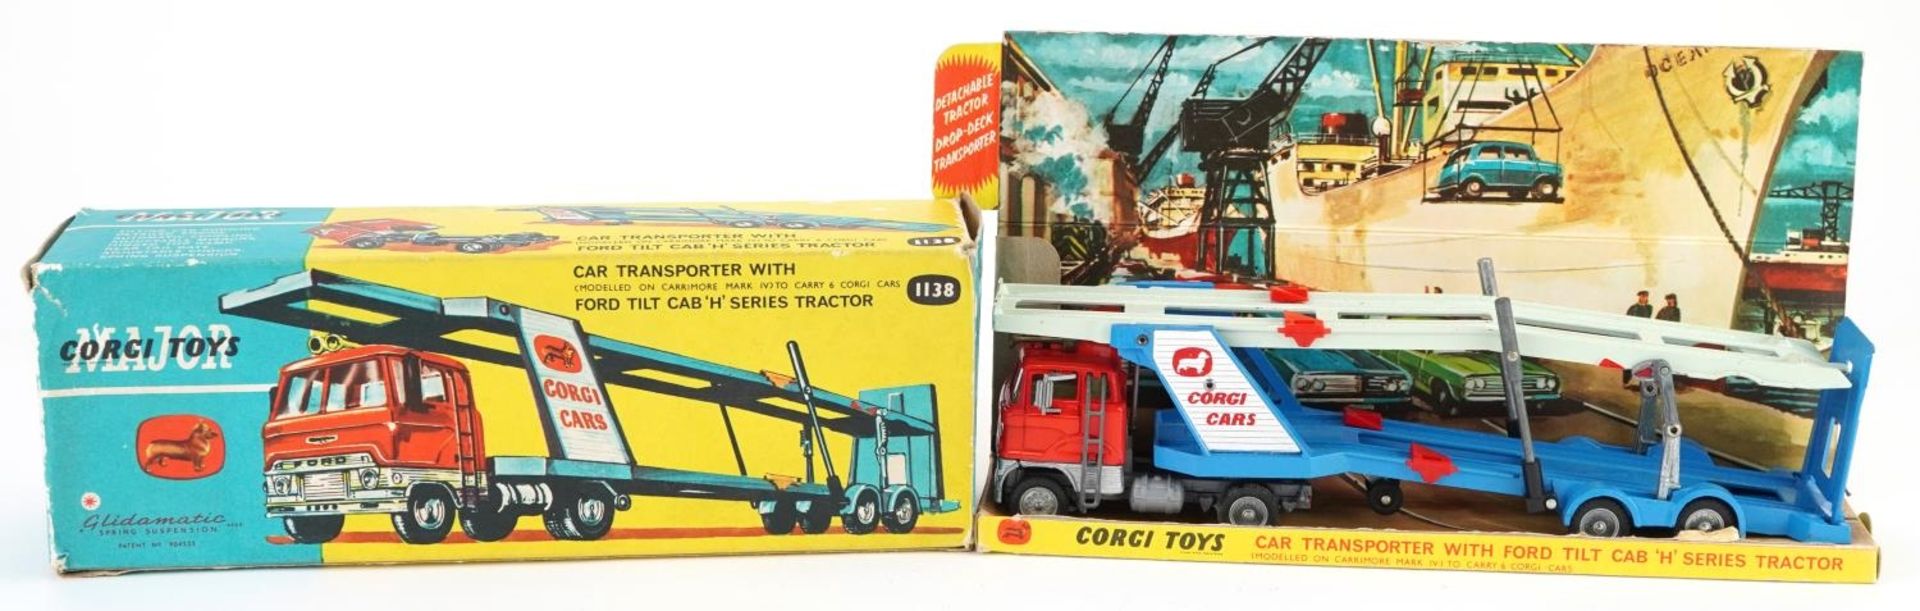 Vintage Corgi Major diecast car transporter with Ford Tilt Cab H Series Tractor and box numbered